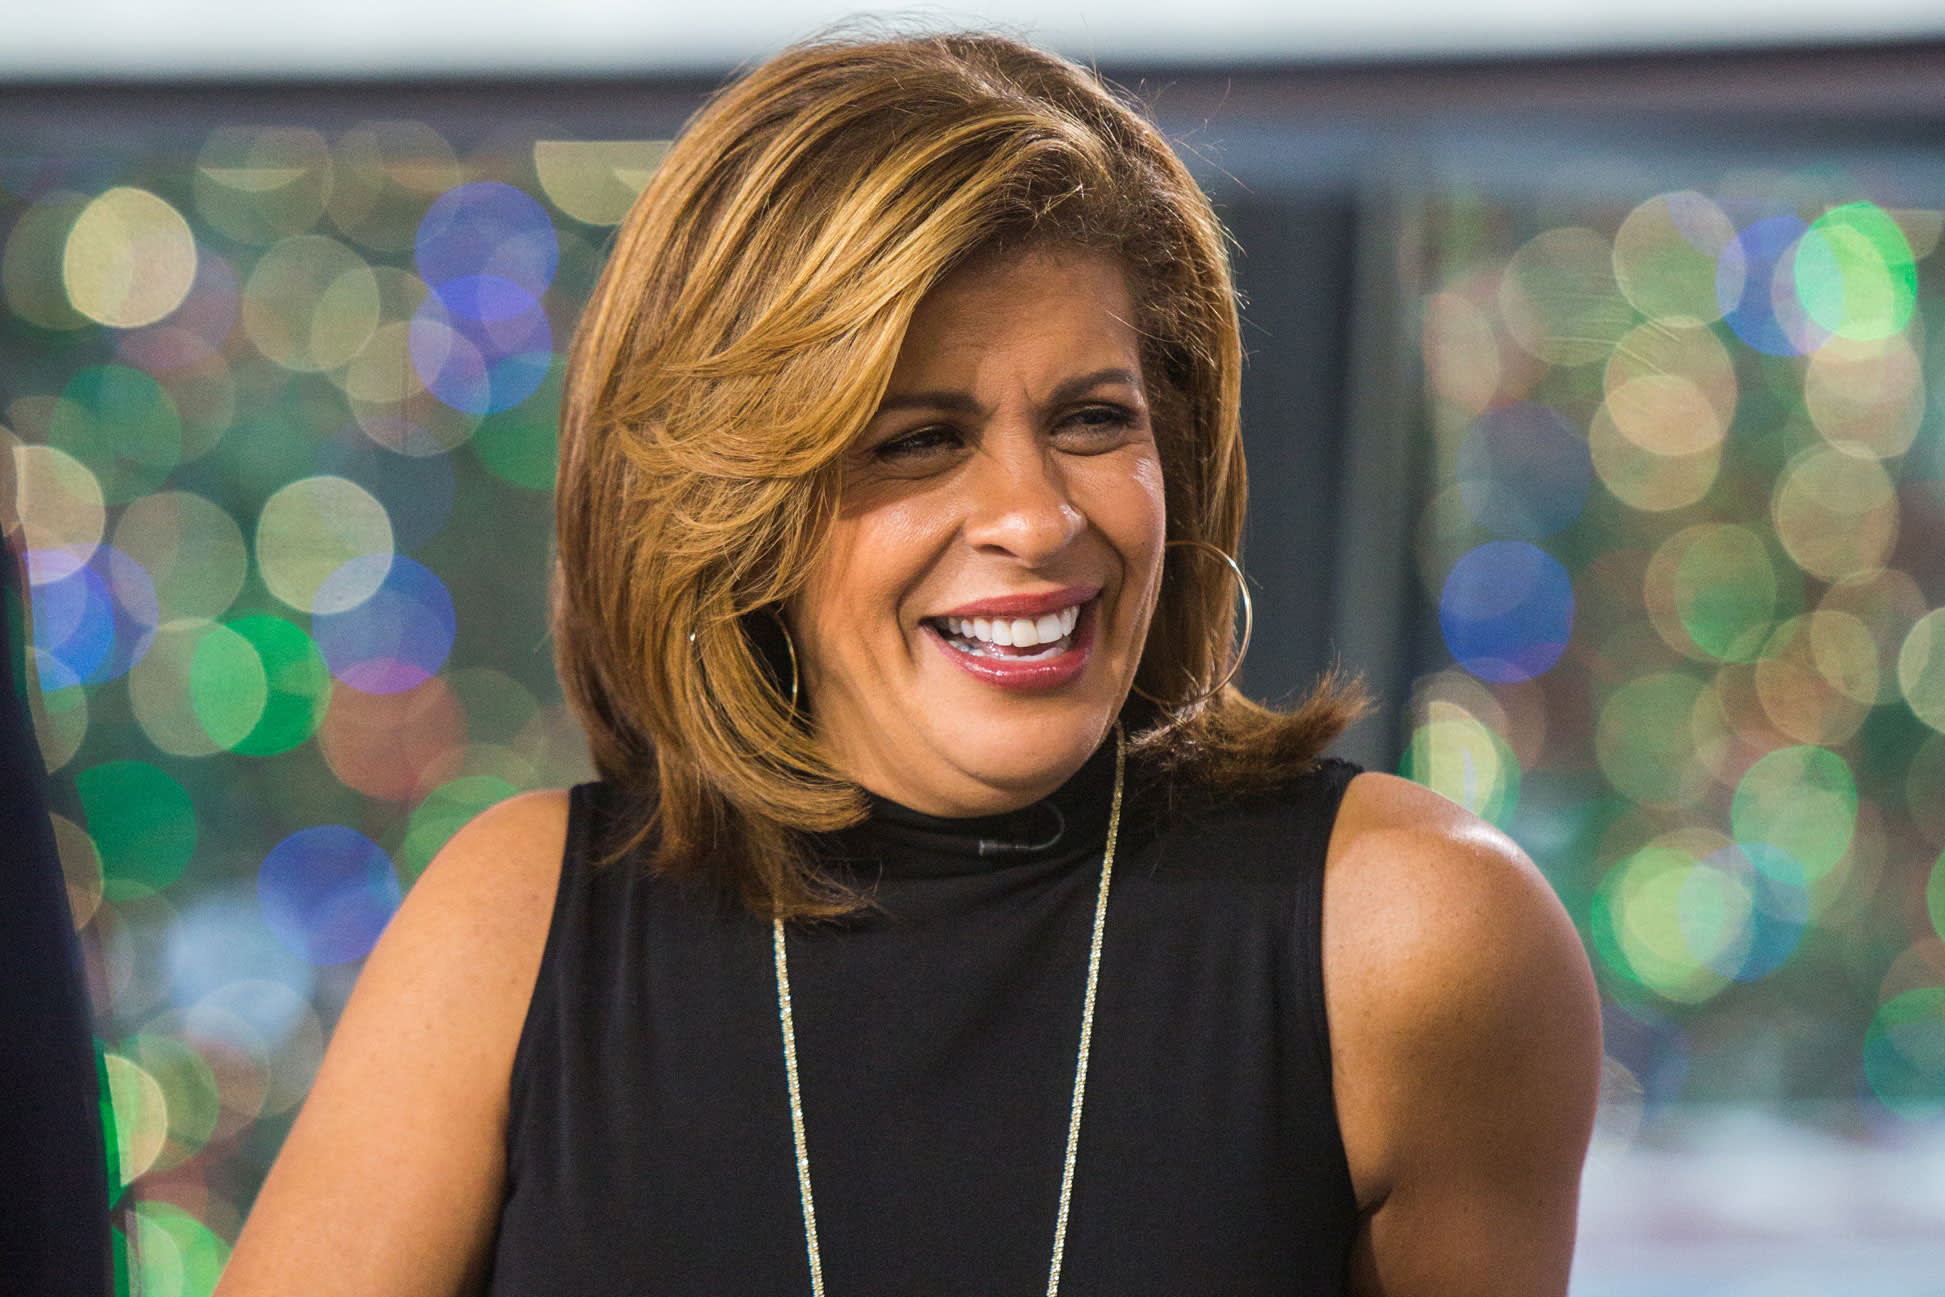 Don't give up: #ShareYourRejection tweets from Hoda Kotb to a writer f...